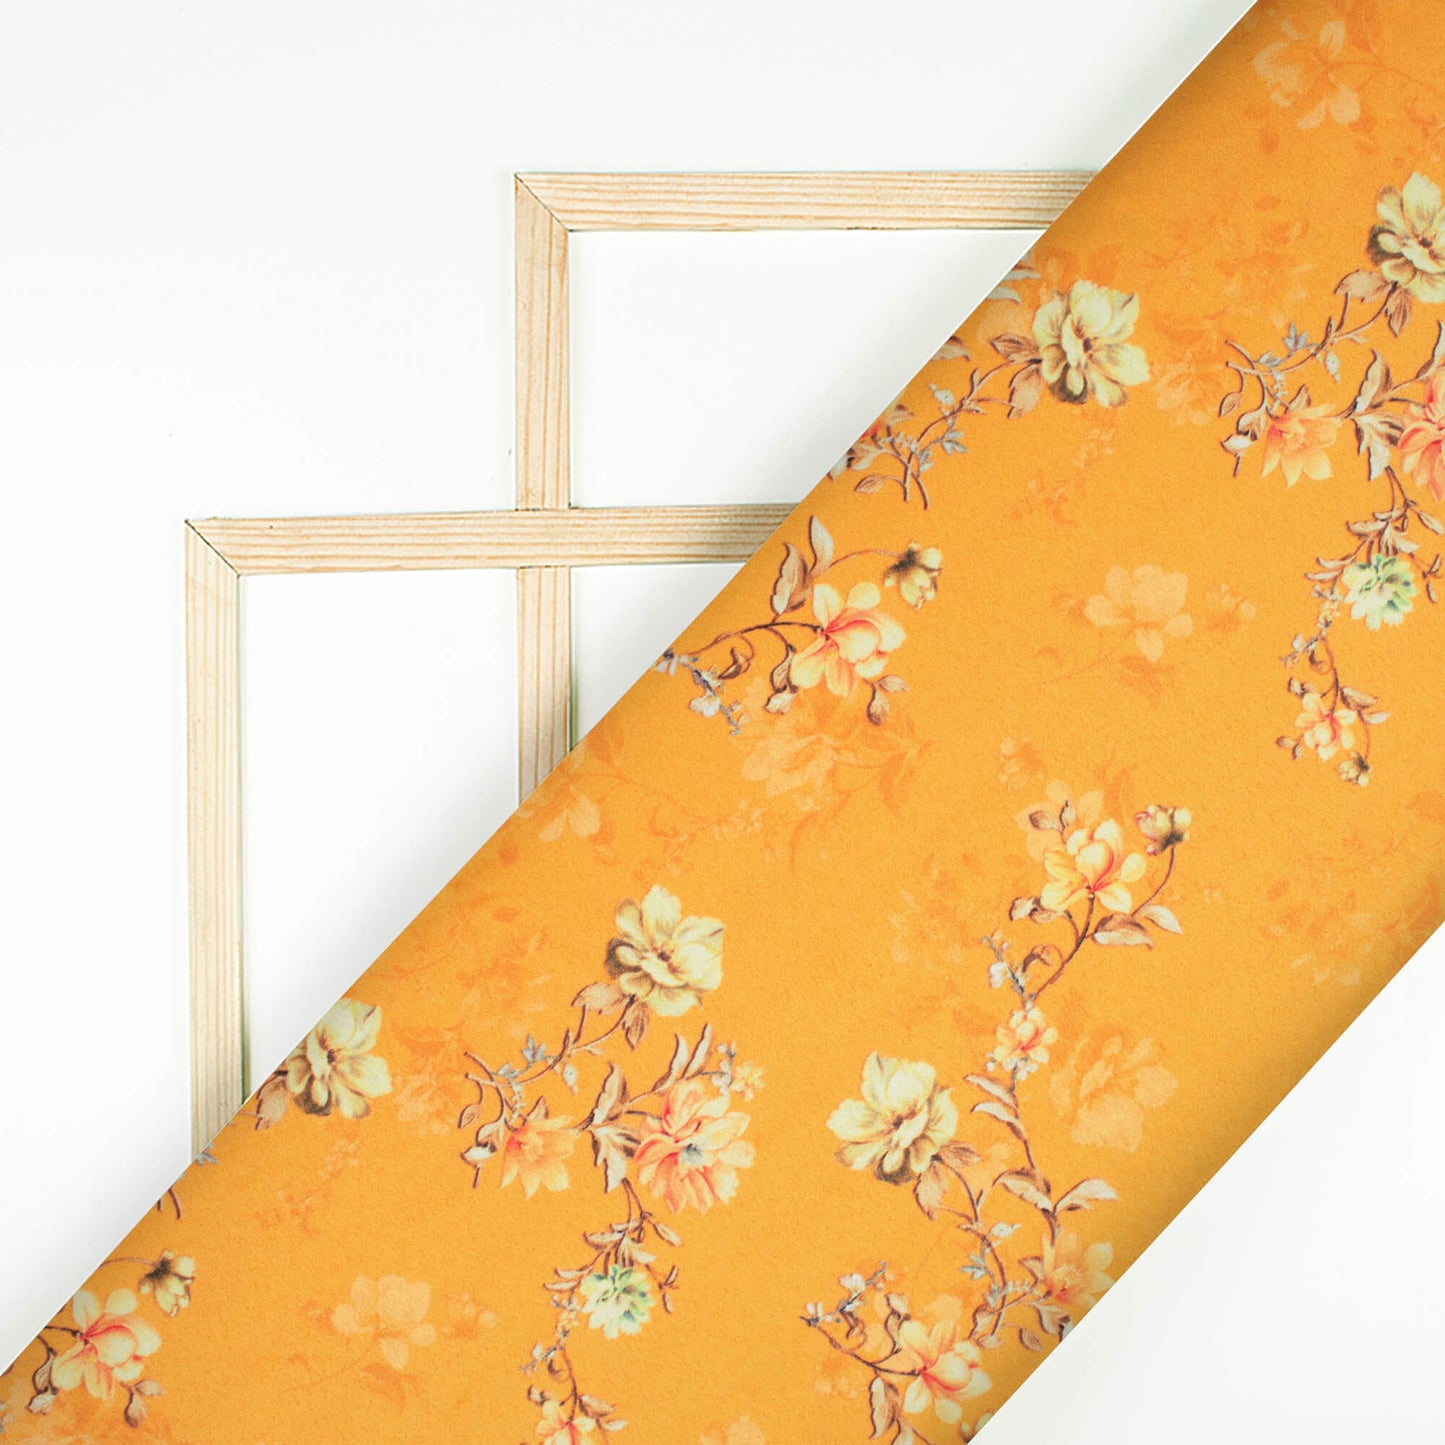 Fire Yellow And Beige Floral Pattern Digital Print Charmeuse Satin Fabric (Width 58 Inches)